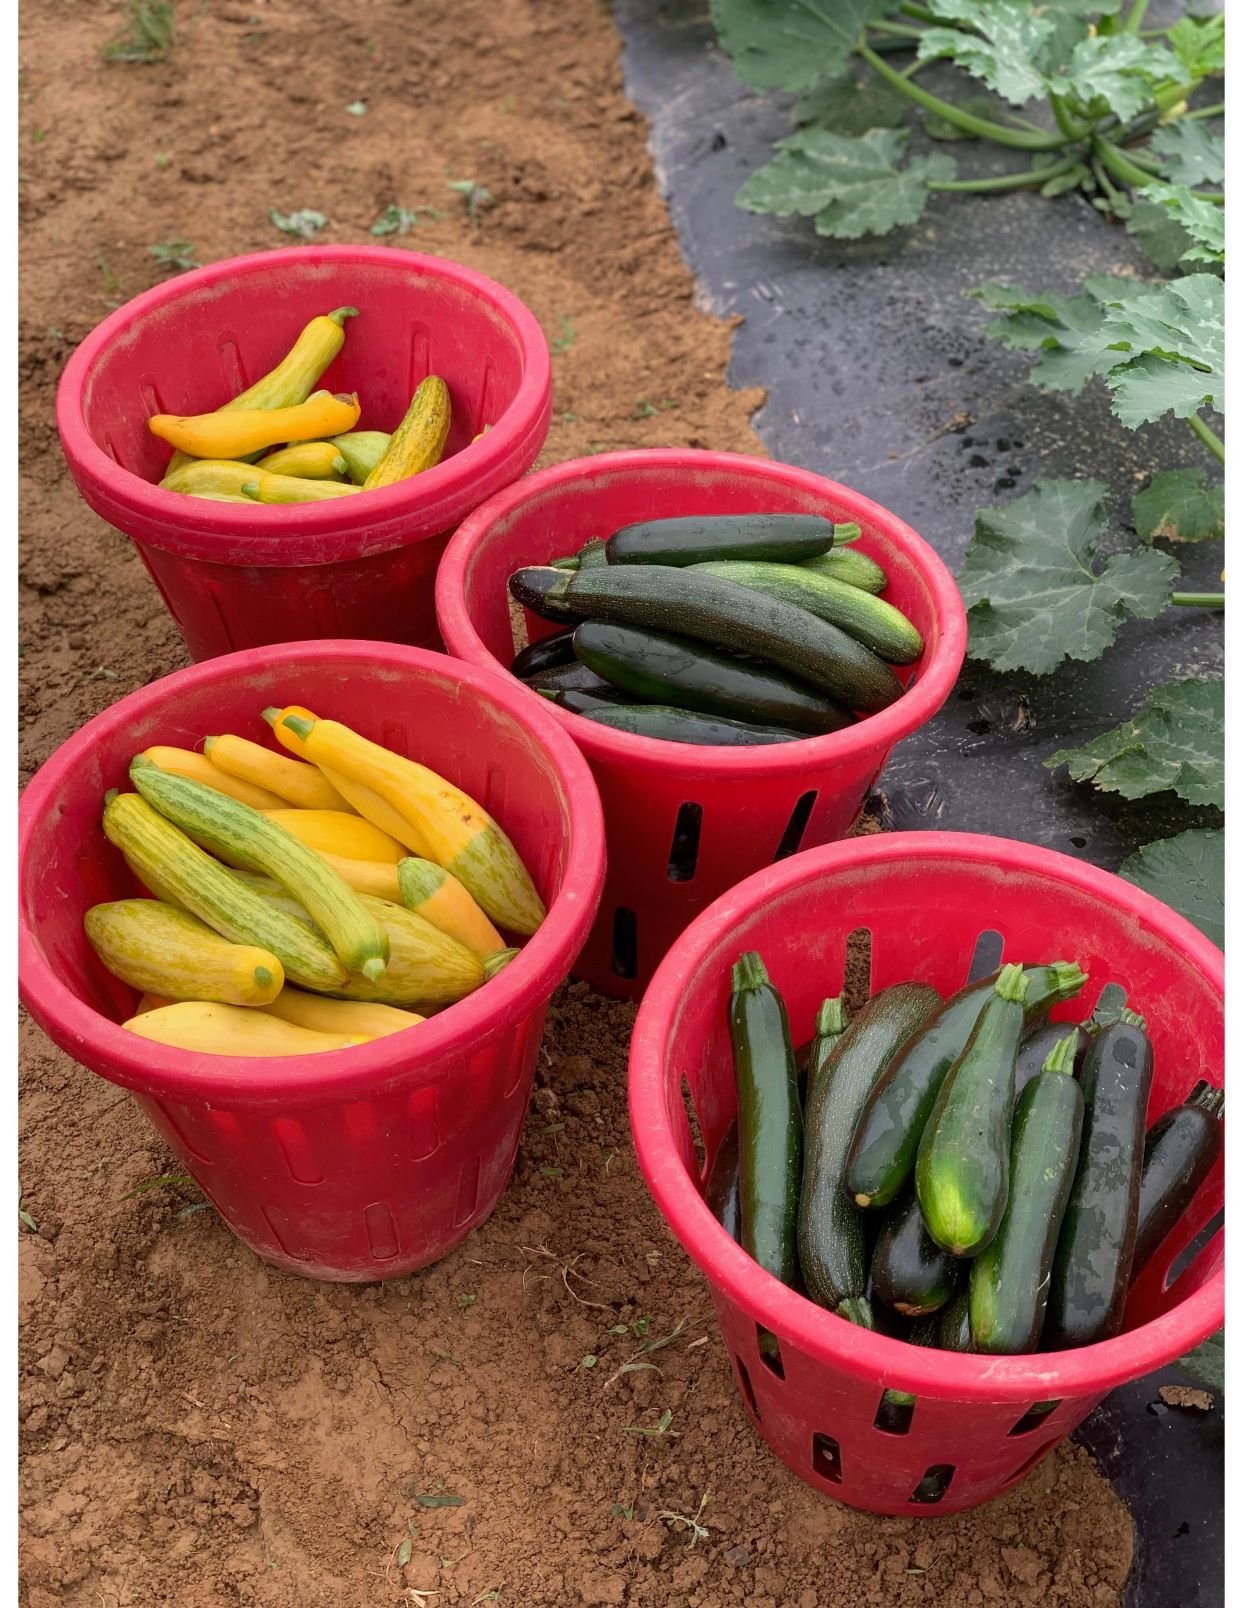 Next Happening: Tuesday CSA: Dickinson College Farm Field Notes for Week of June 24th